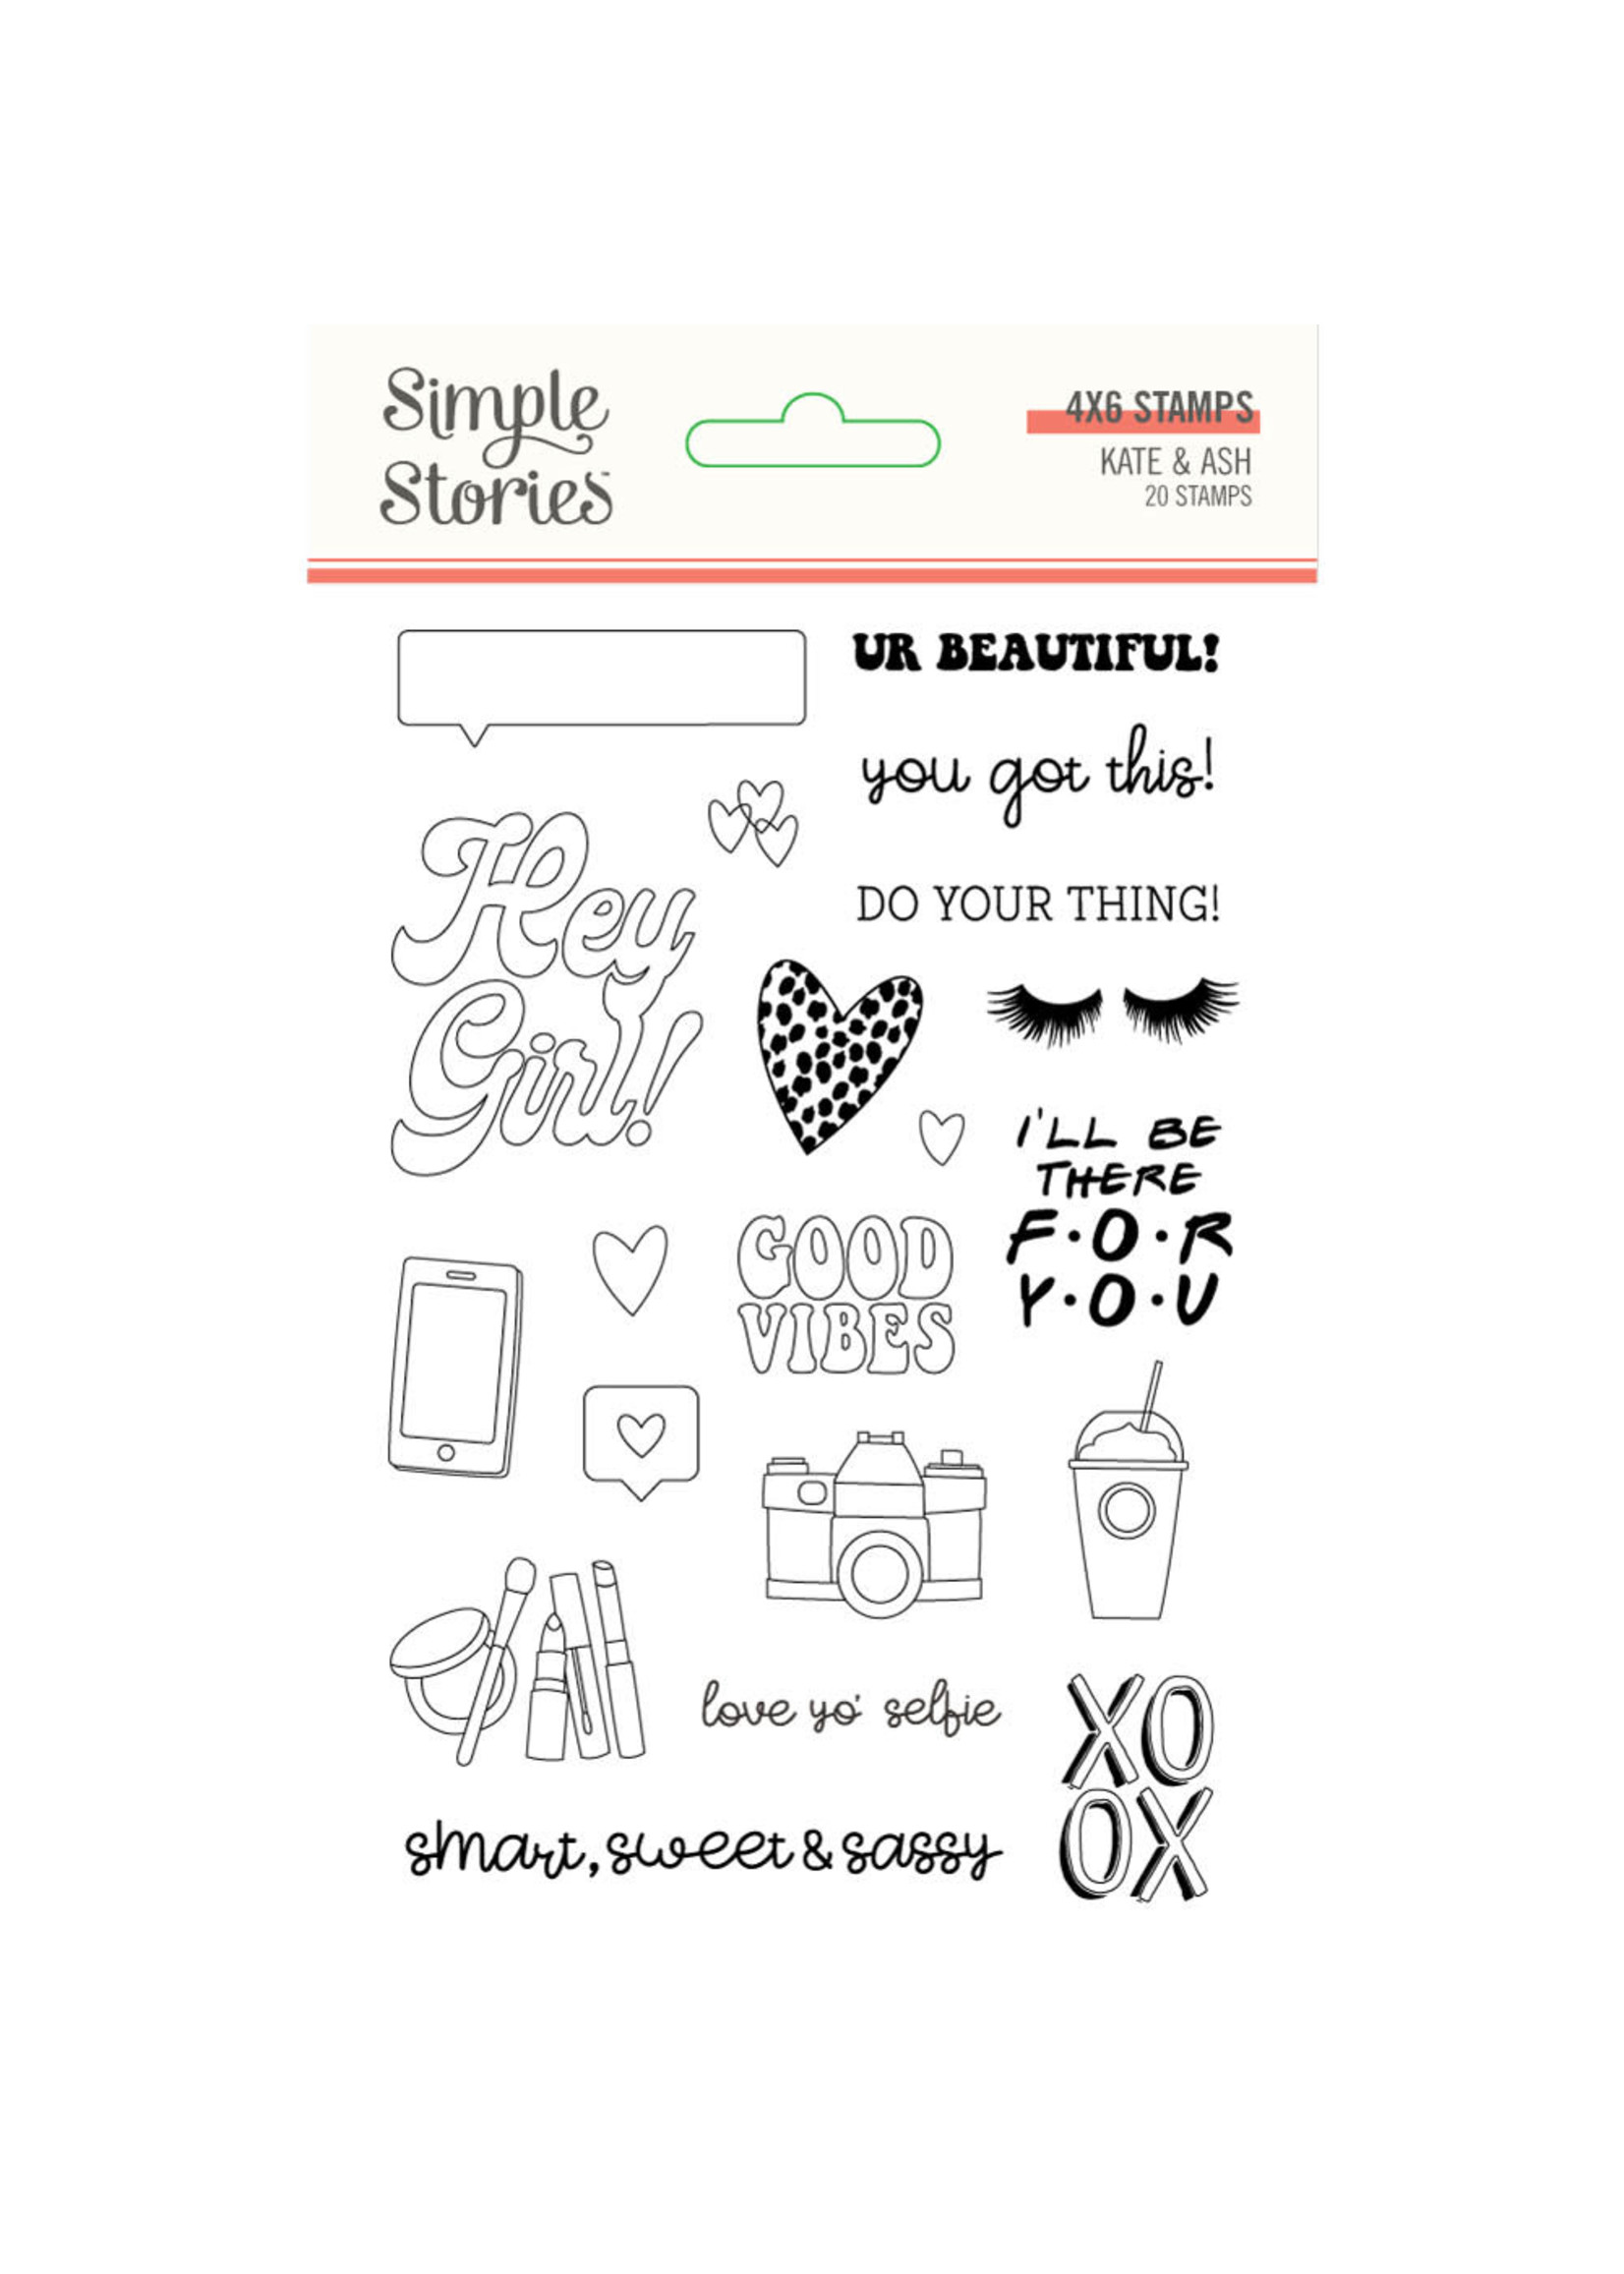 Simple Stories SS Stamps Kate & Ash